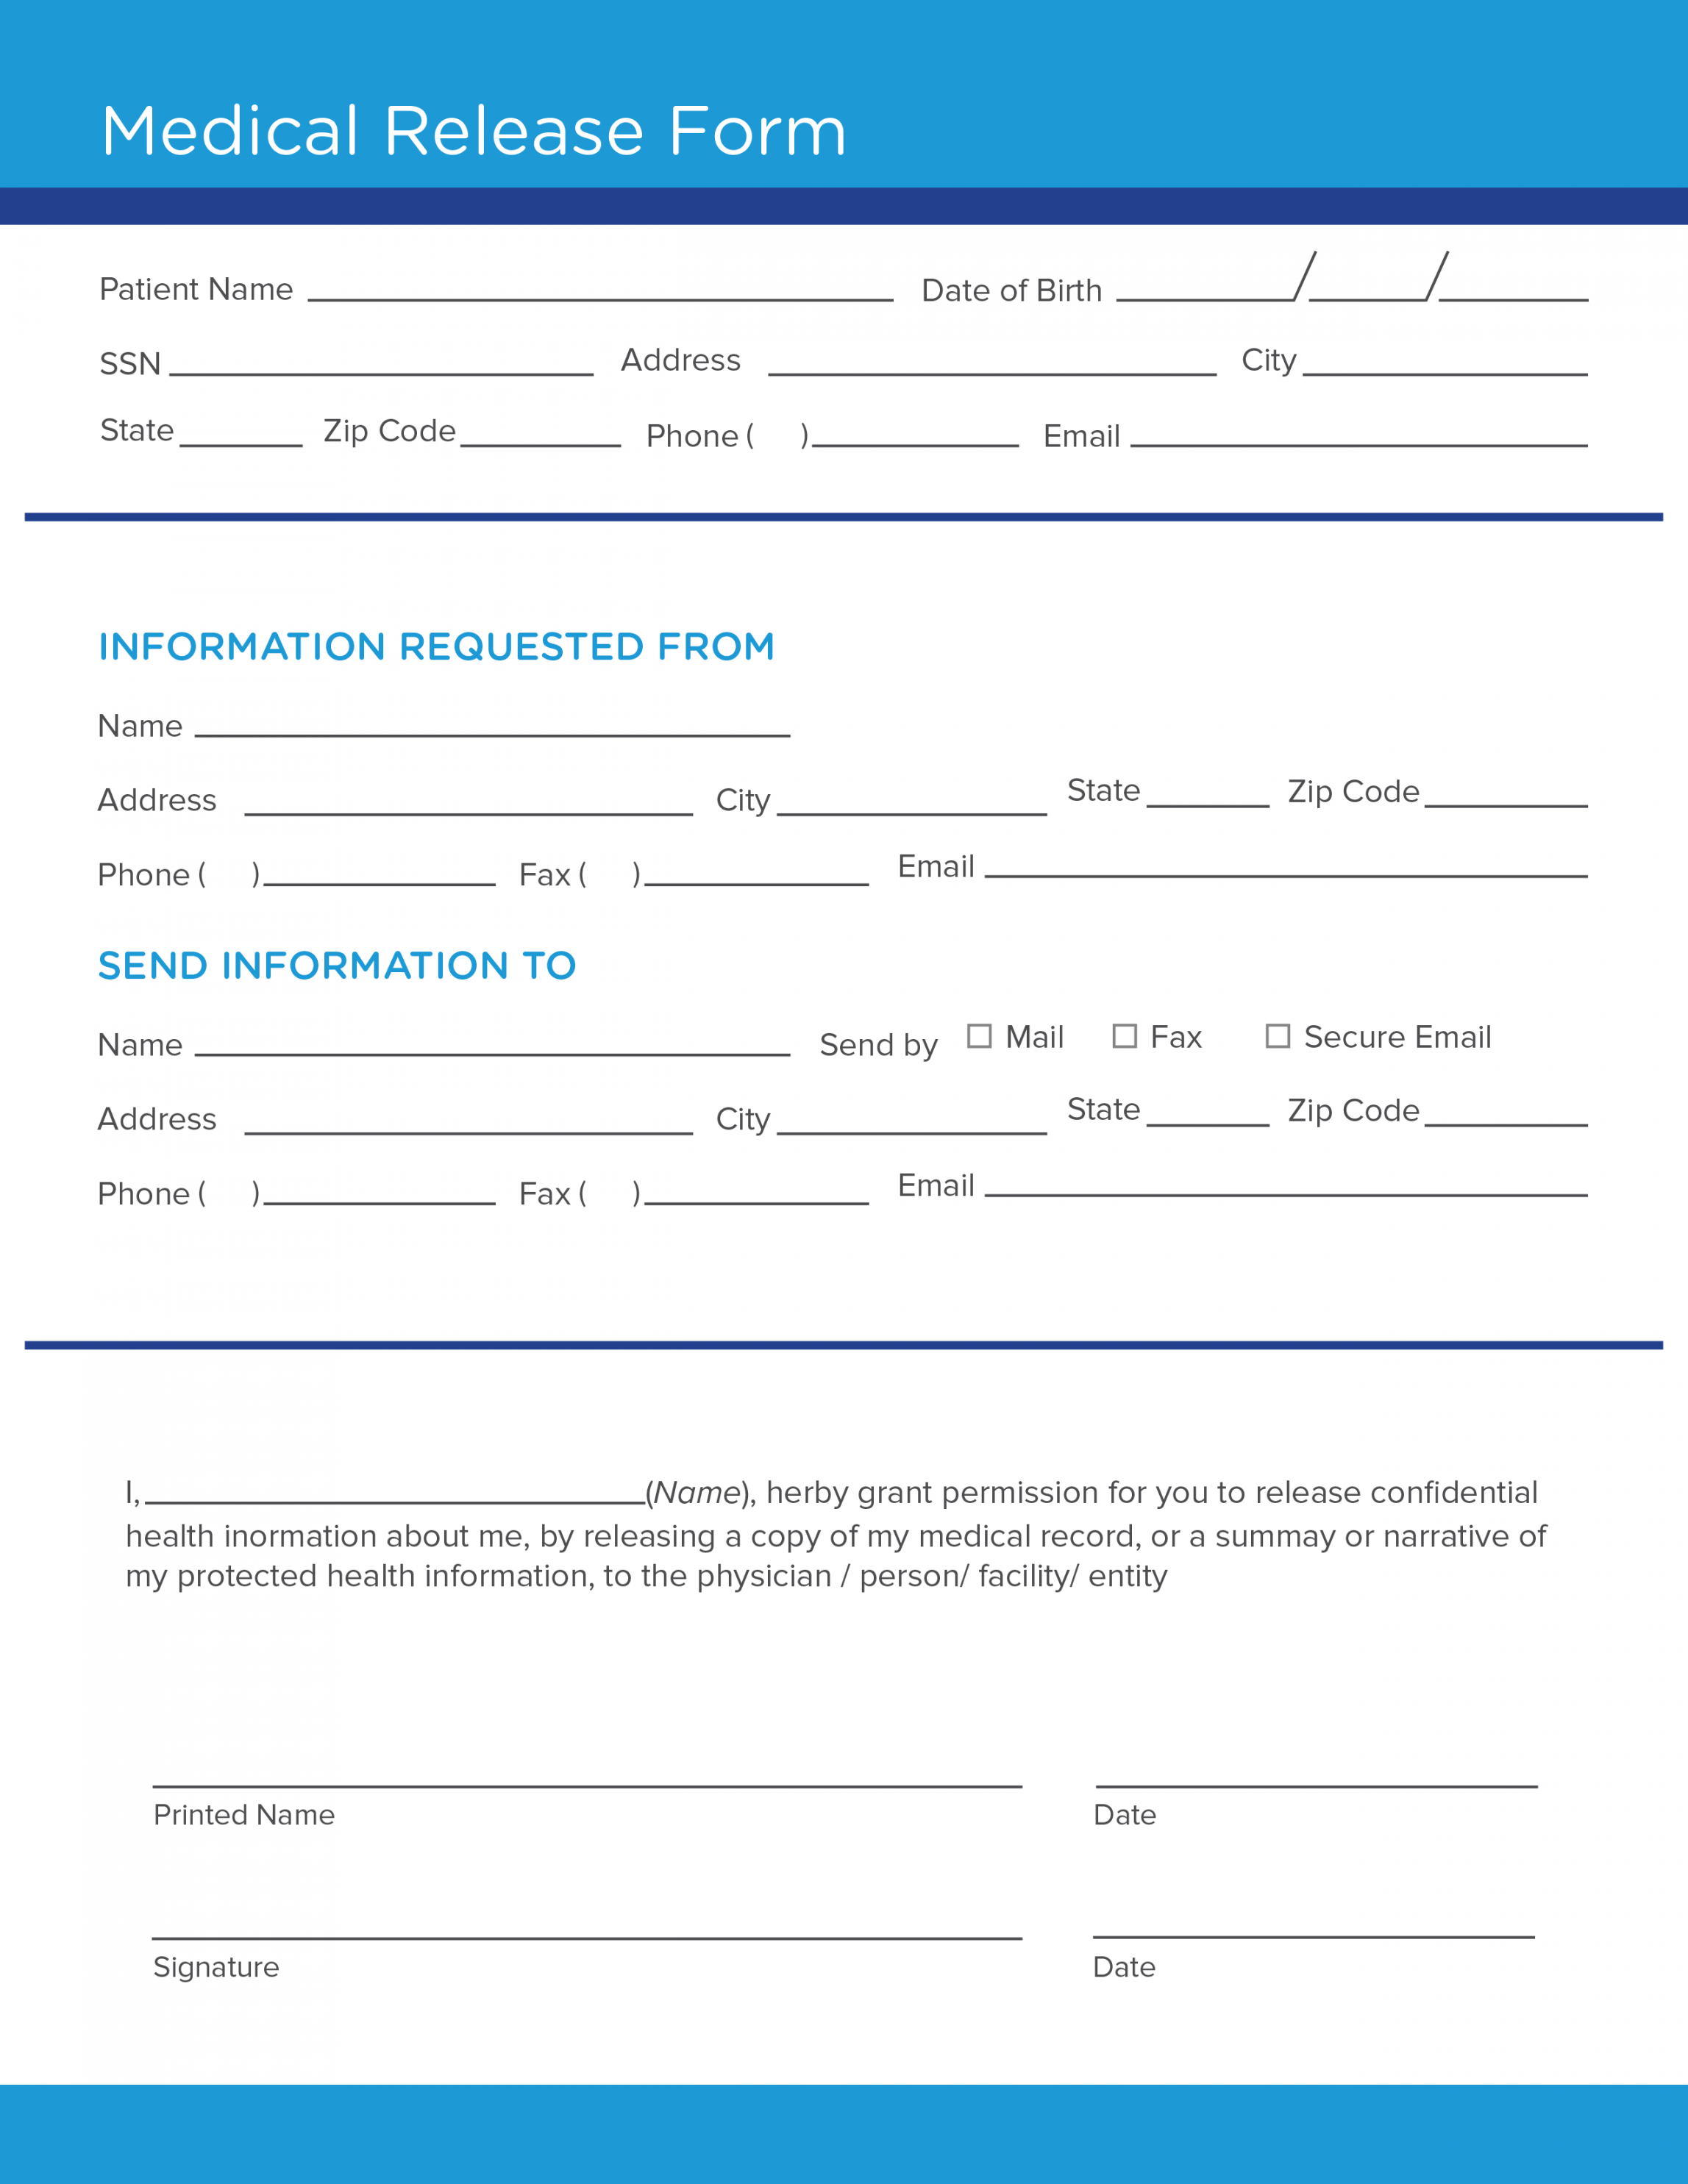 Free Medical Release Form Template - Continuum